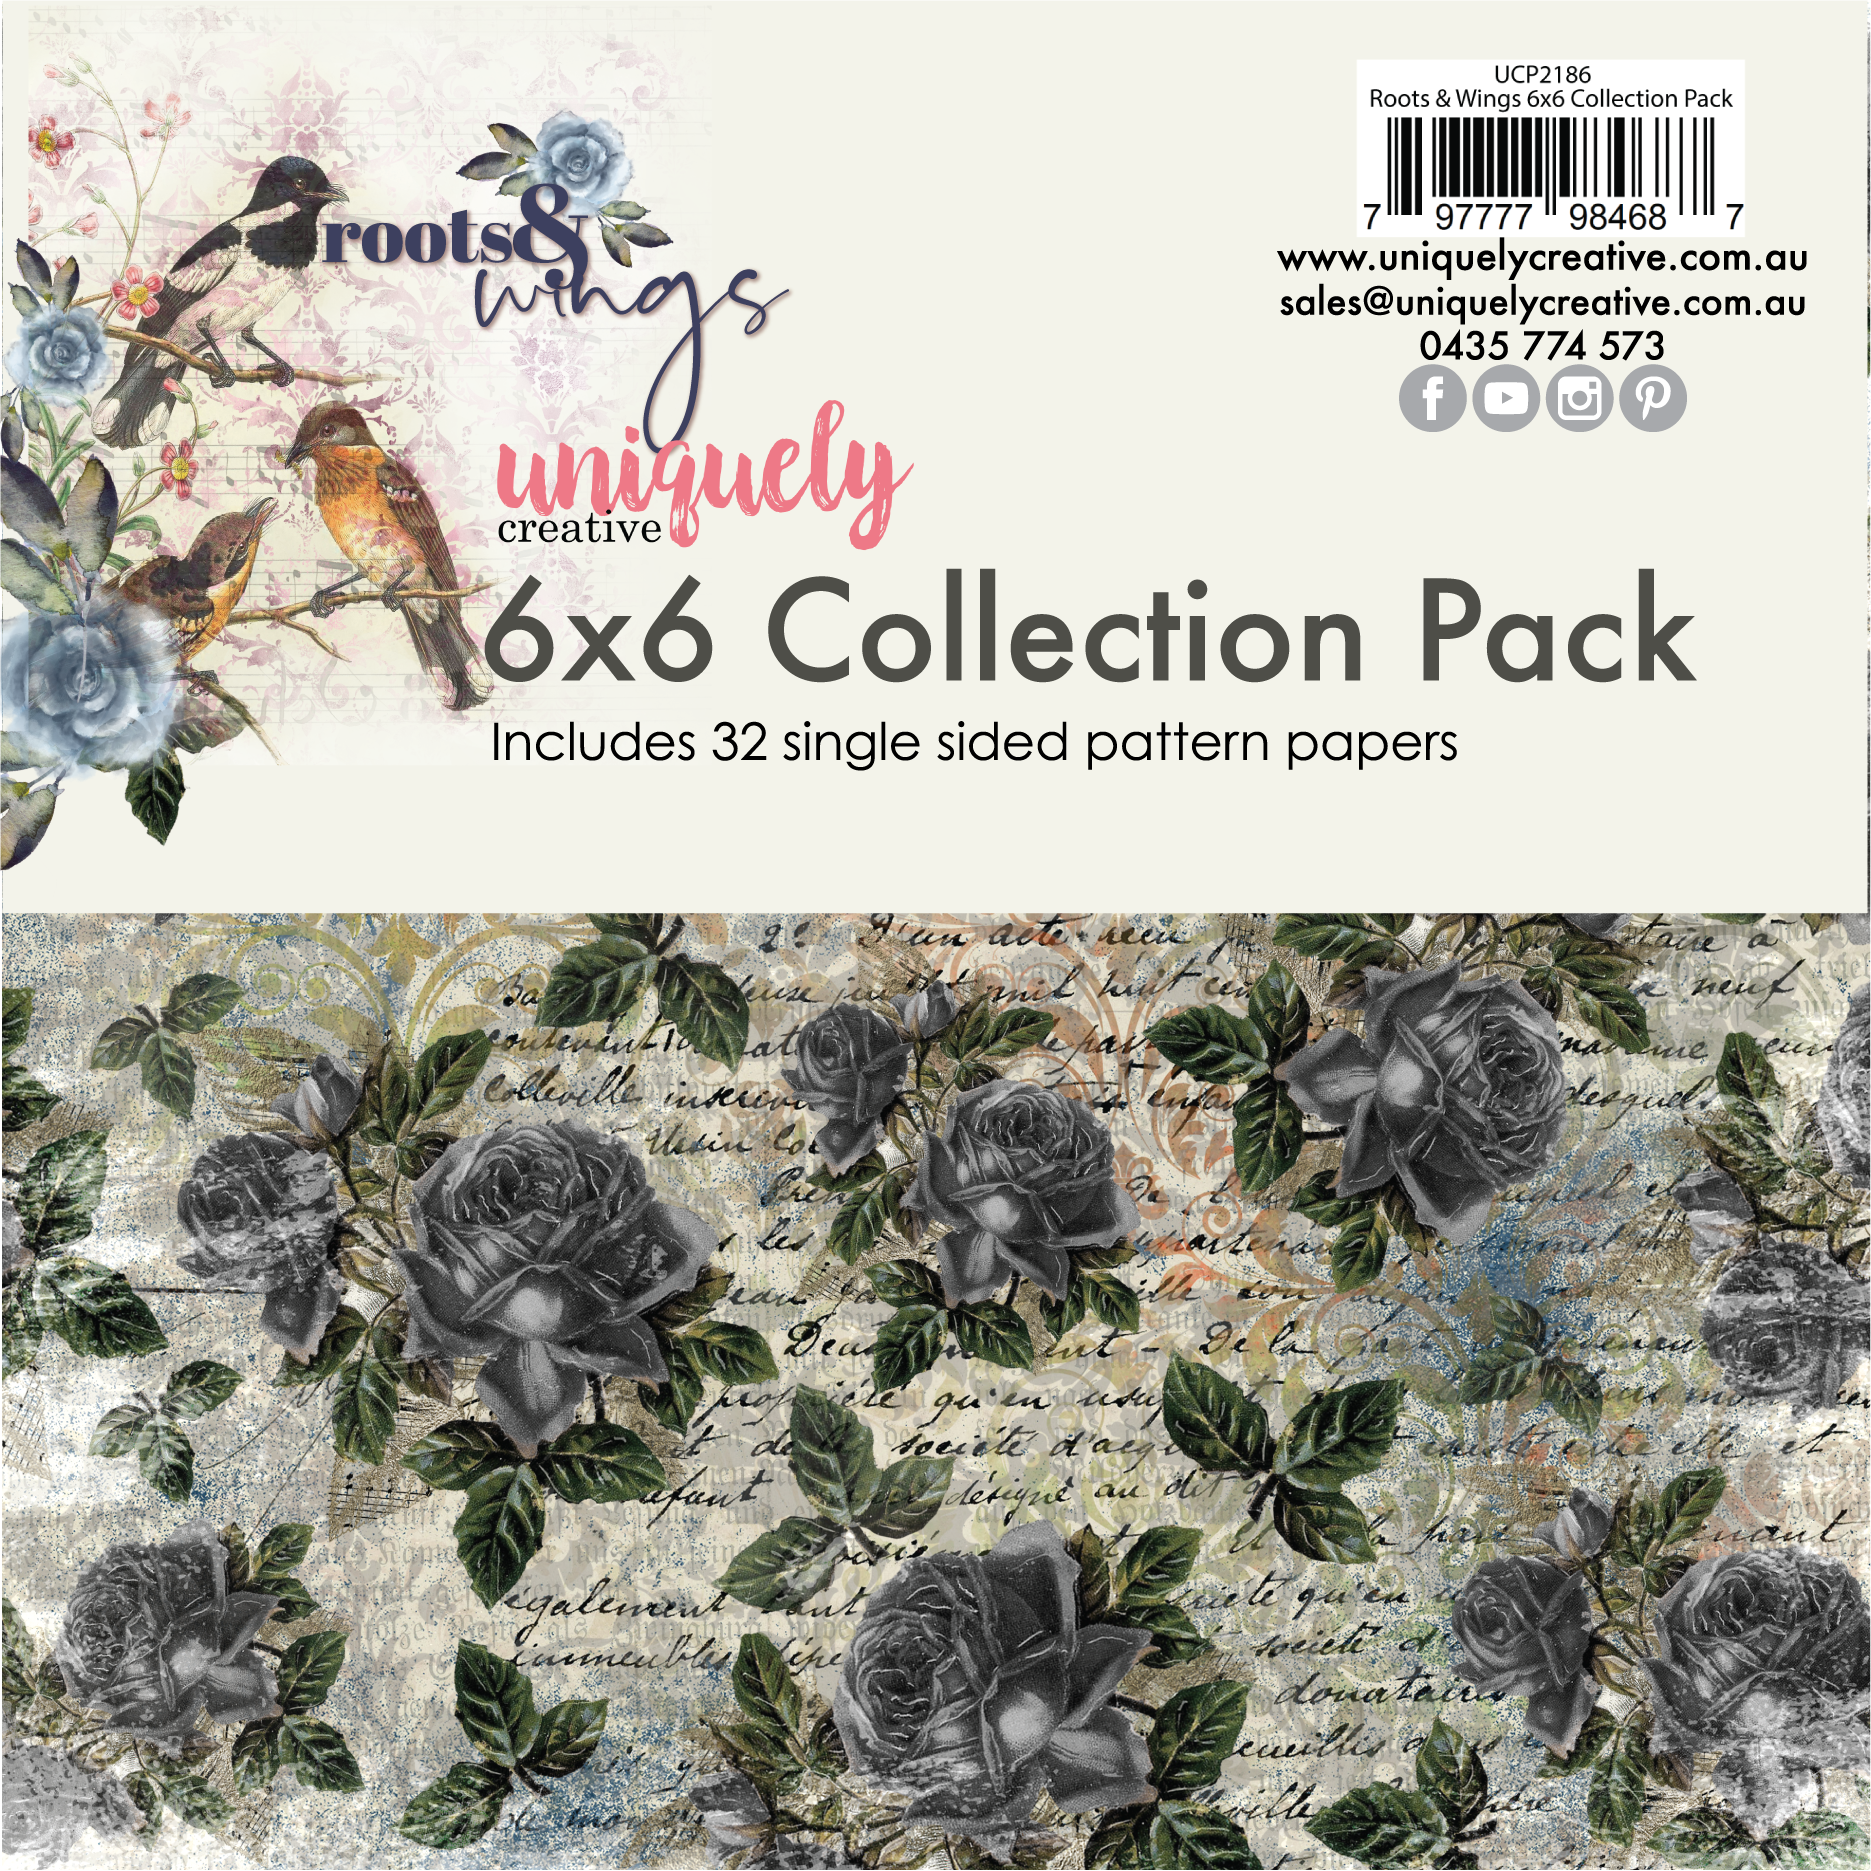 Uniquely Creative - Roots & Wings - 6x6 Collection pack